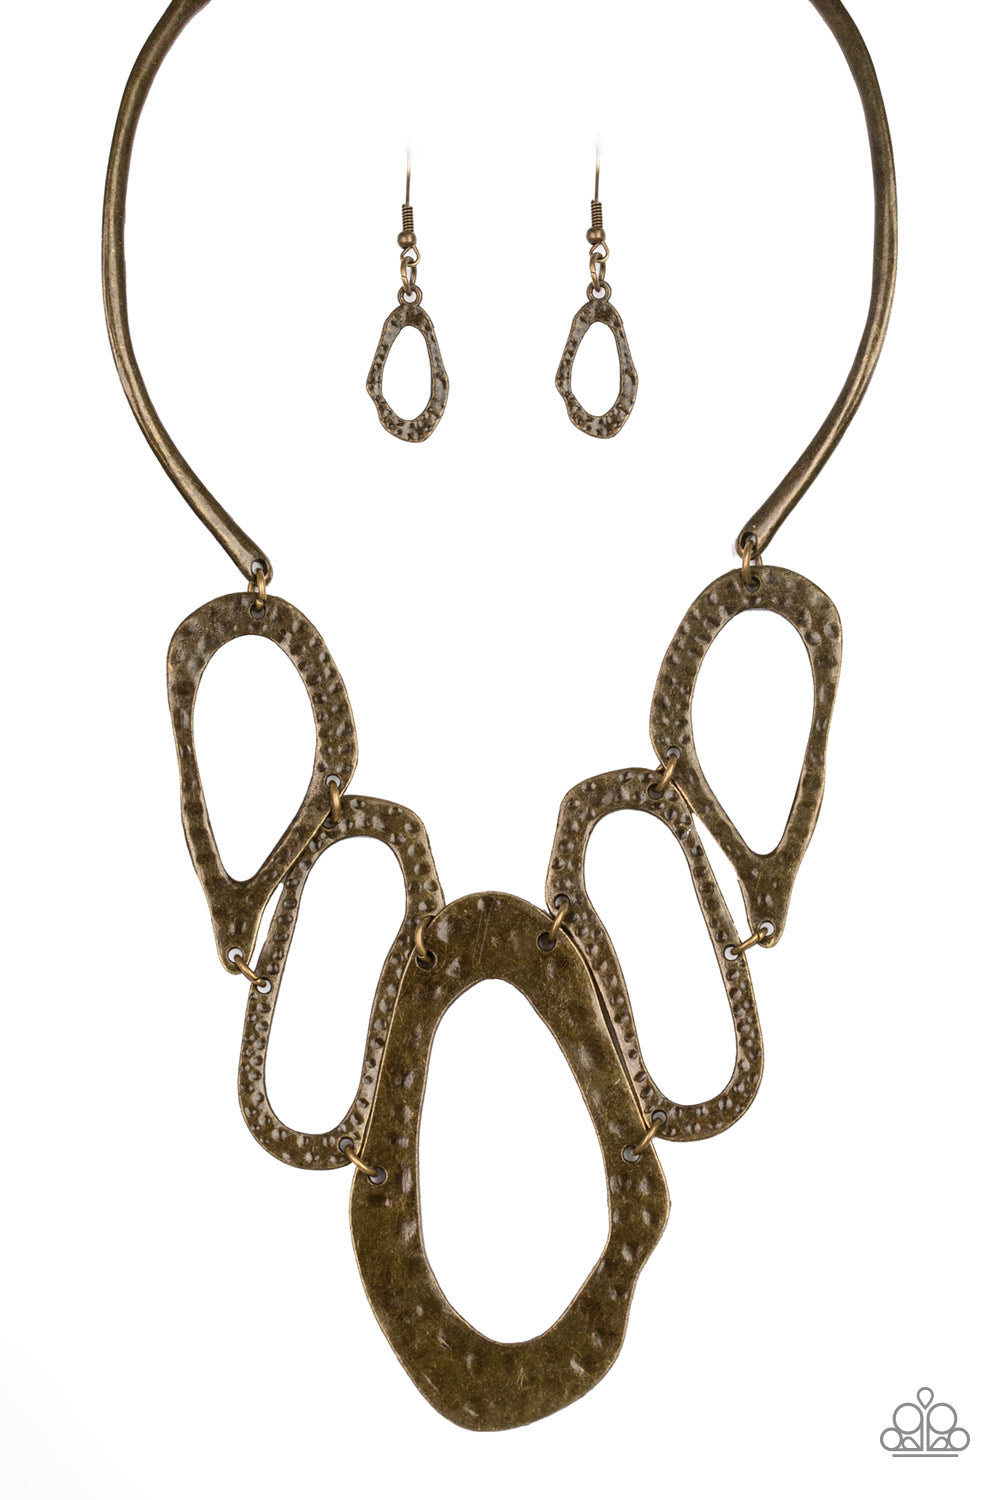 Attached to two bent brass bars, delicately hammered asymmetrical brass hoops link below the collar for an edgy statement making look. Features an adjustable clasp closure.